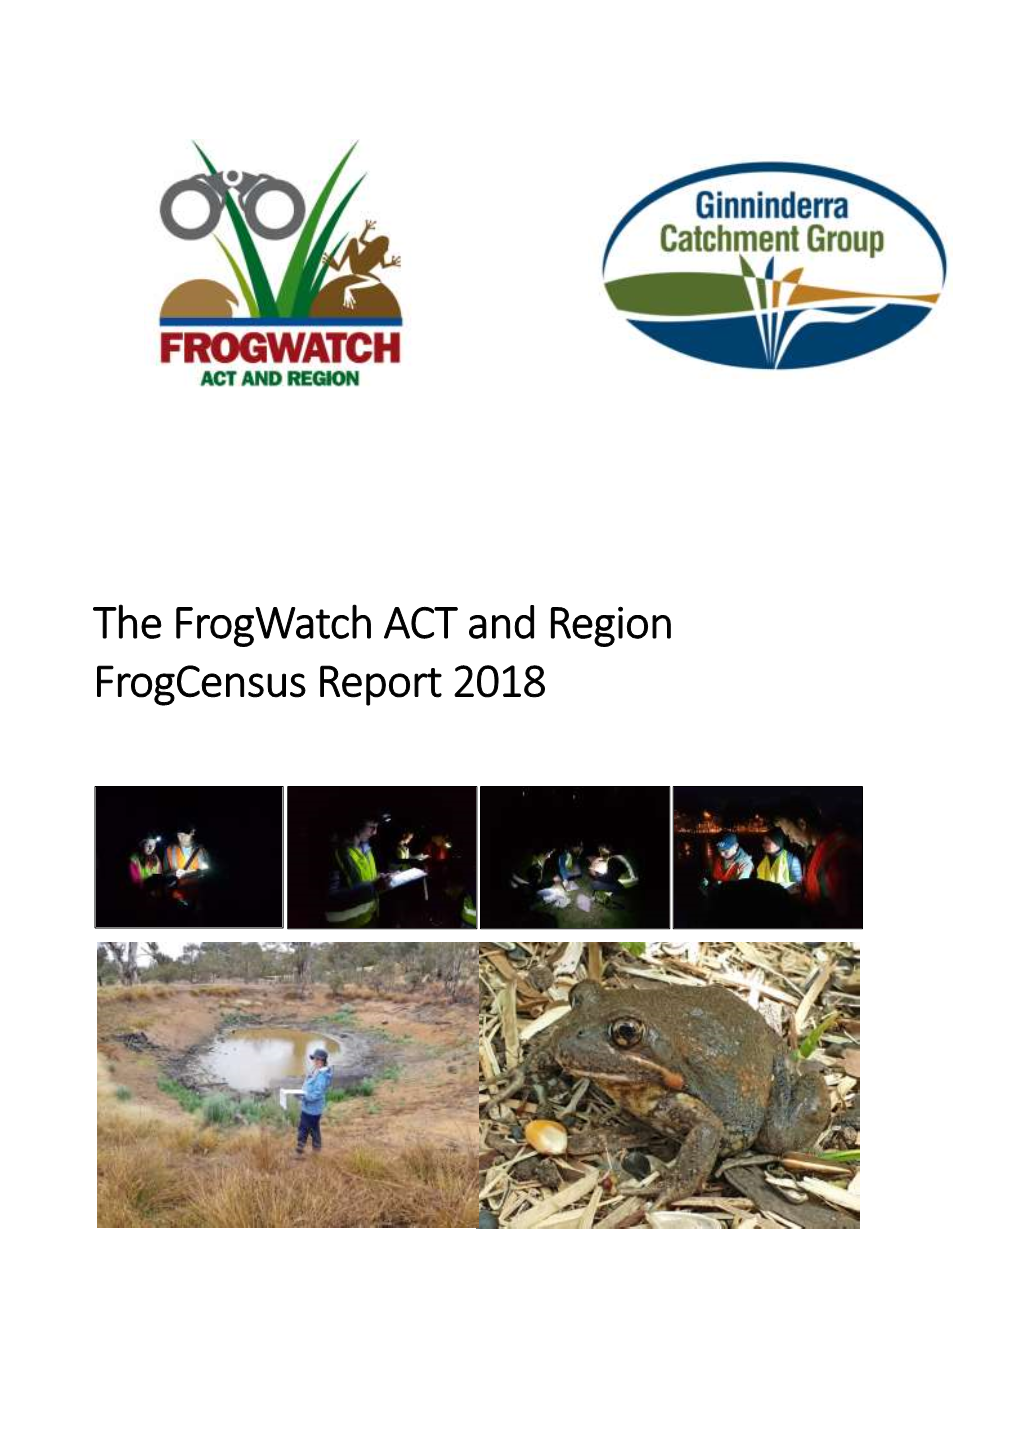 The Frogwatch ACT and Region Frogcensus Report 2018